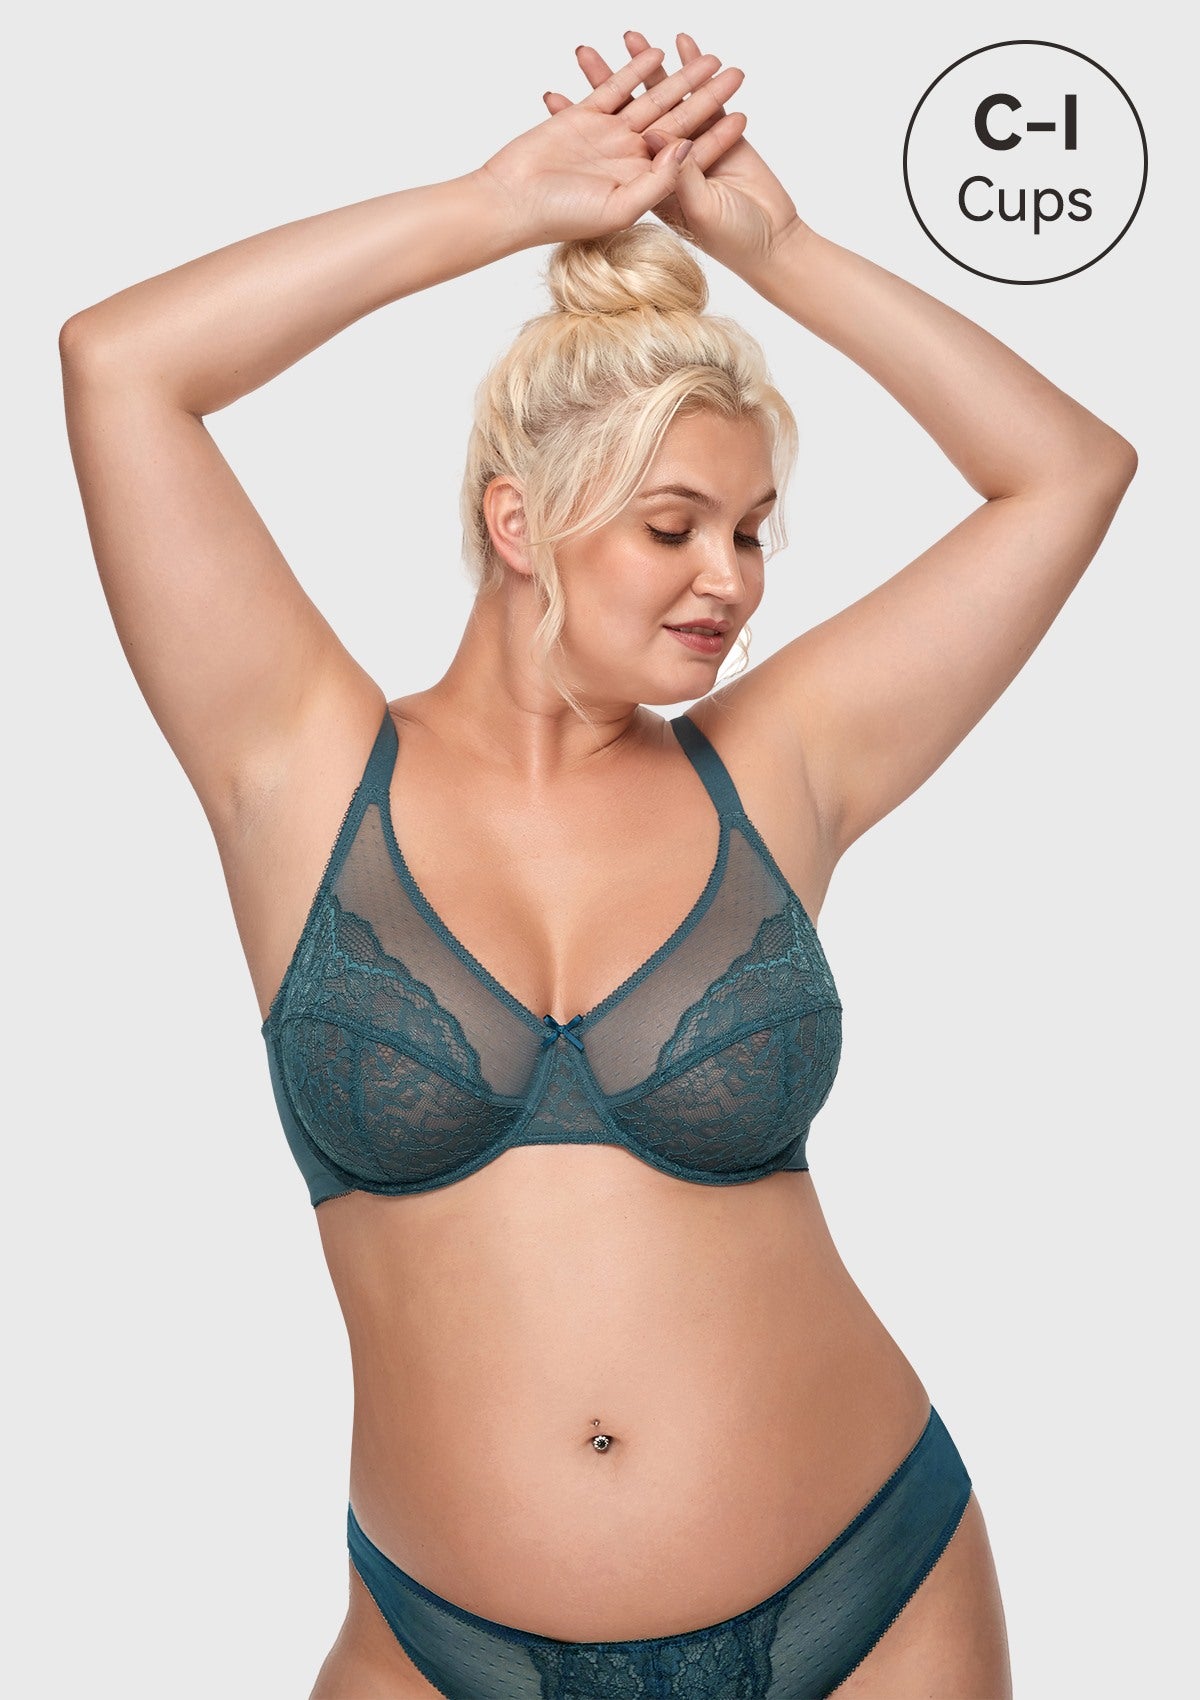 HSIA Enchante Full Coverage Bra: Supportive Bra For Big Busts - Balsam Blue / 42 / C